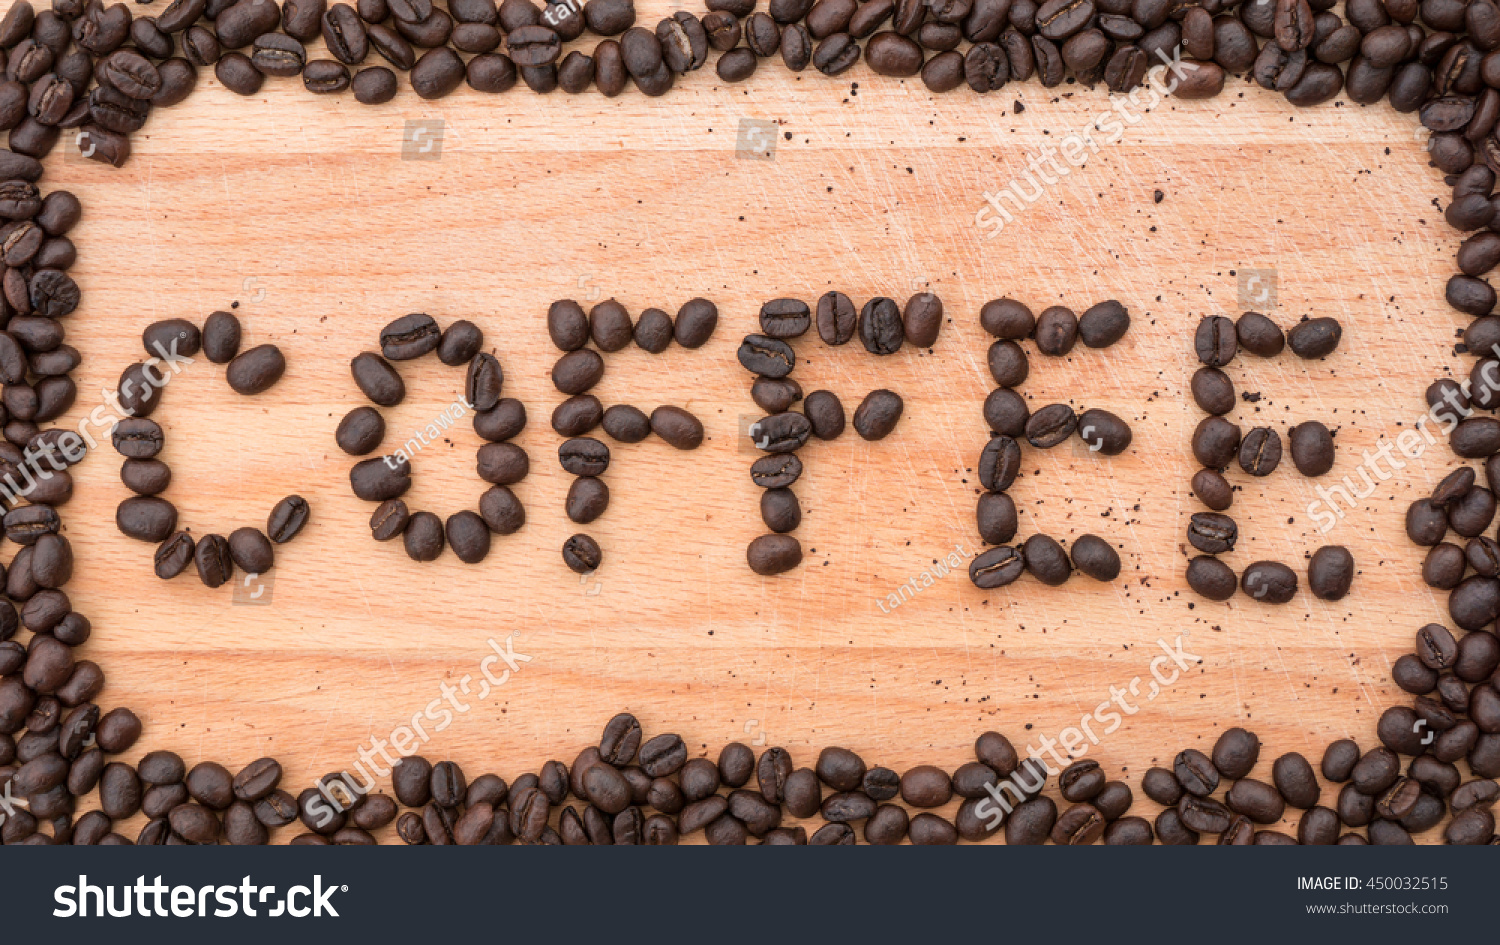 How to Spell Coffee? 